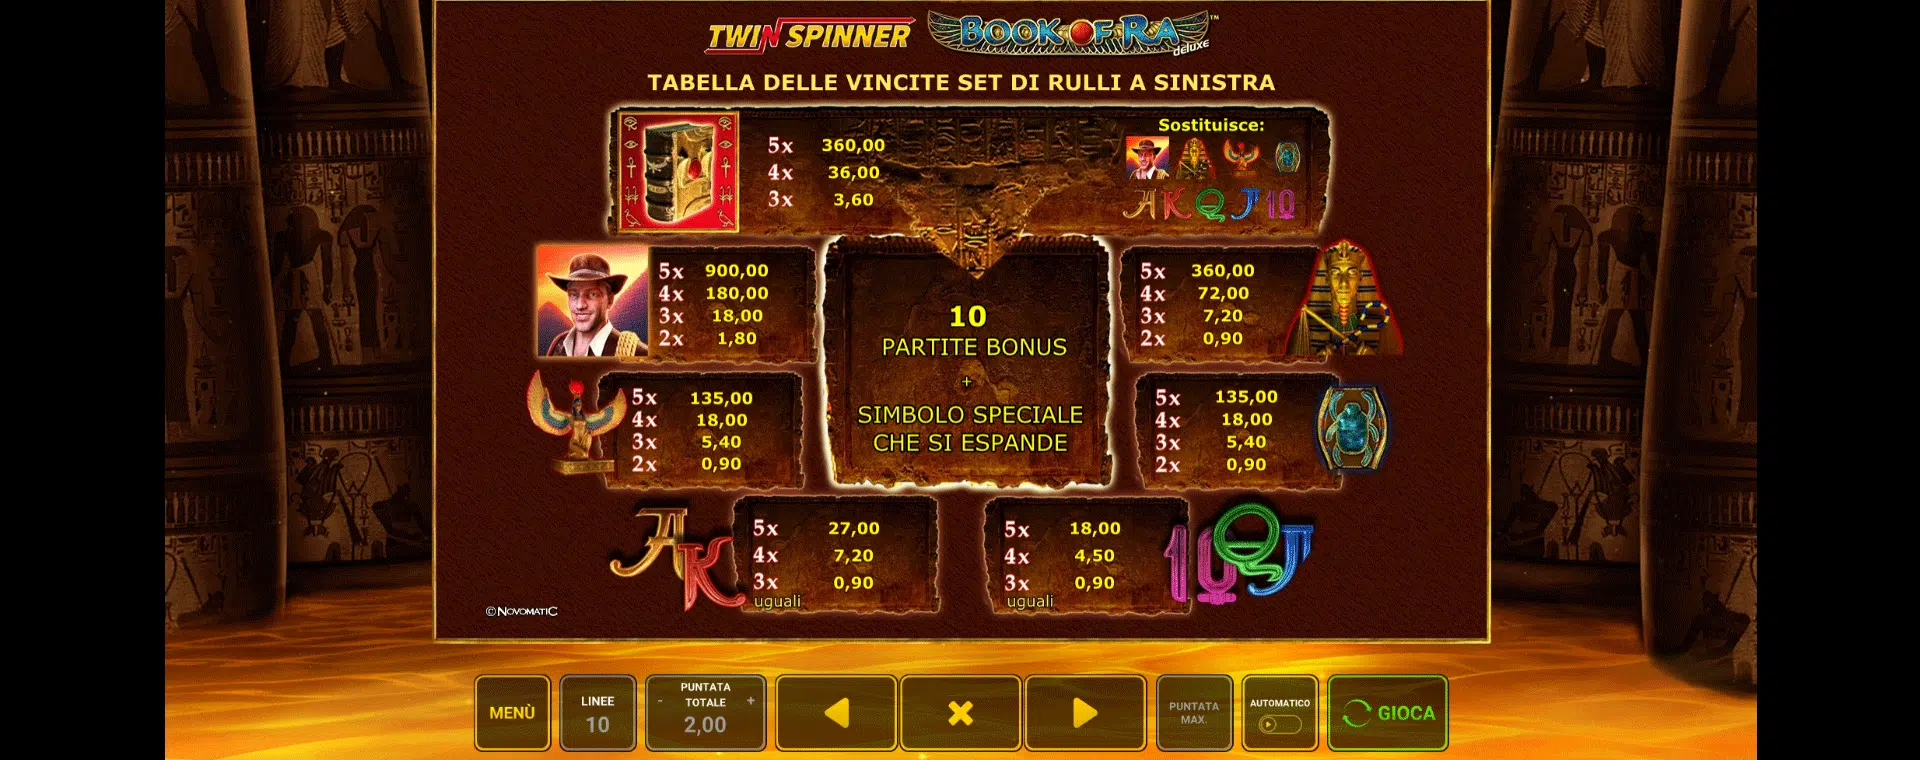 twin spinner gioco